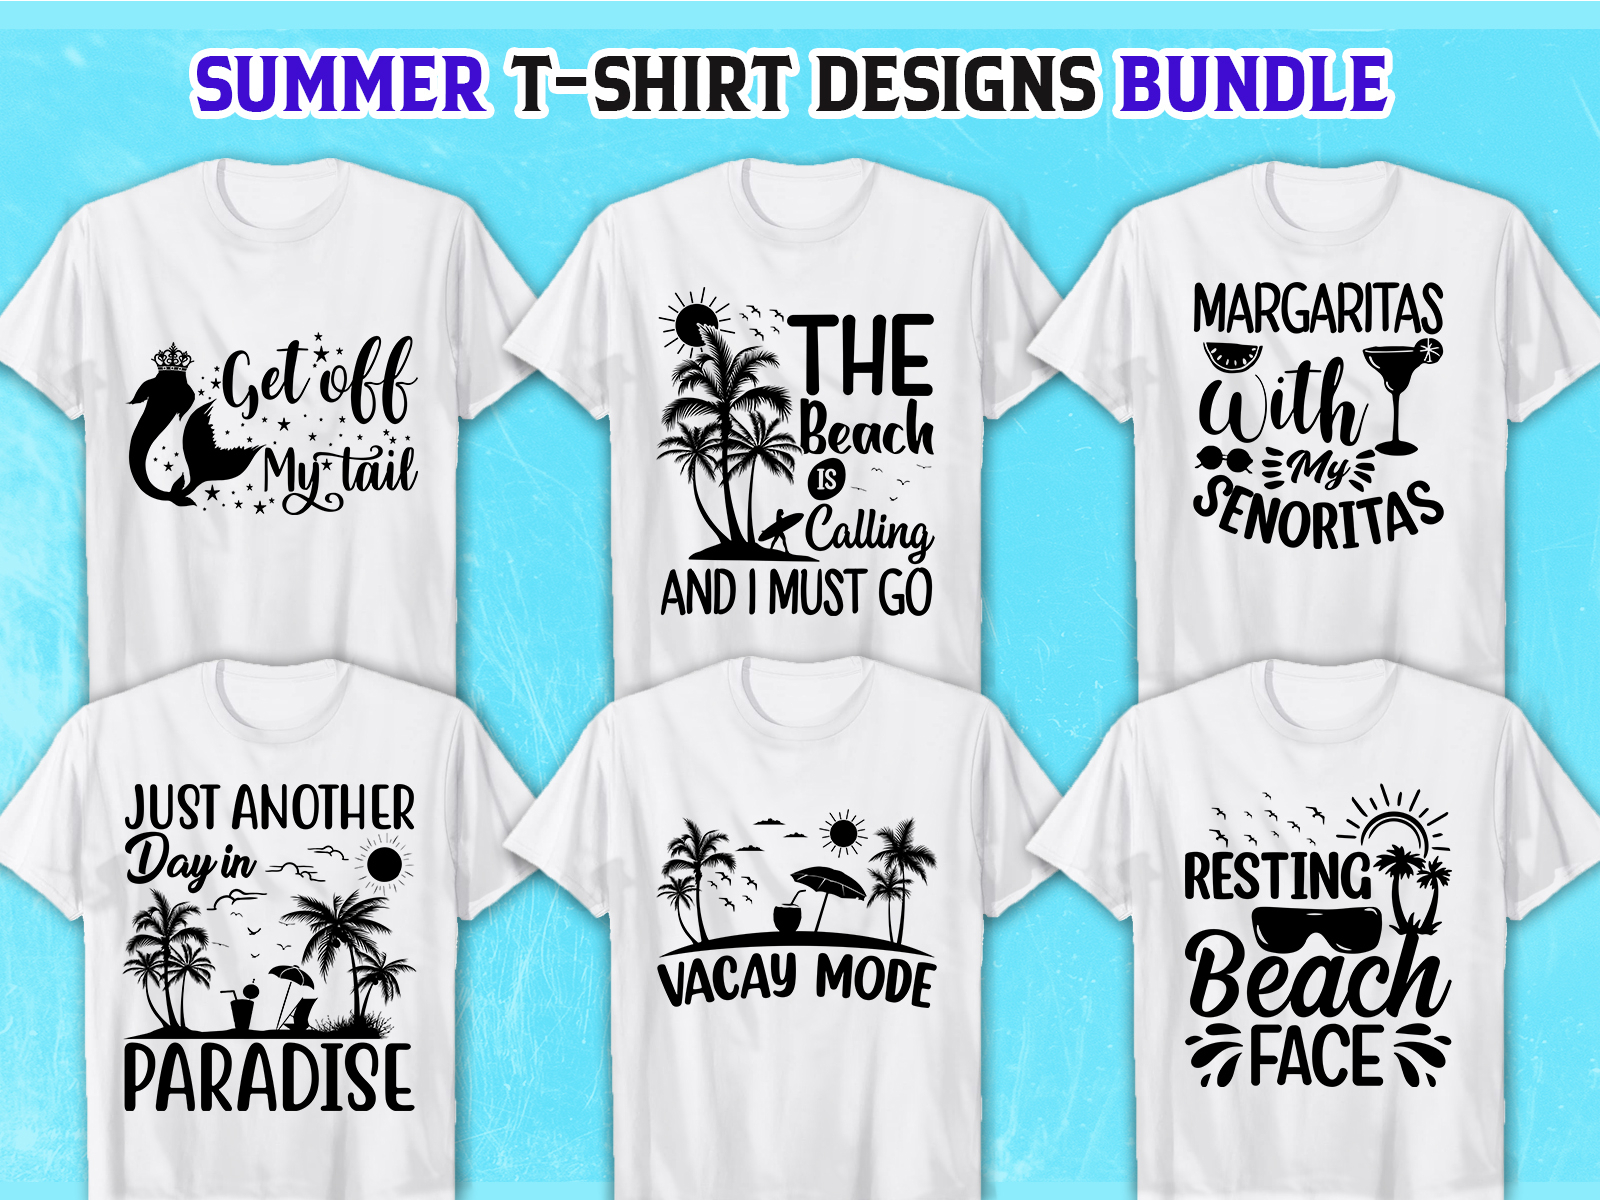 Summer SVG T-Shirt design bundle by Best T-Shirts Collection on Dribbble